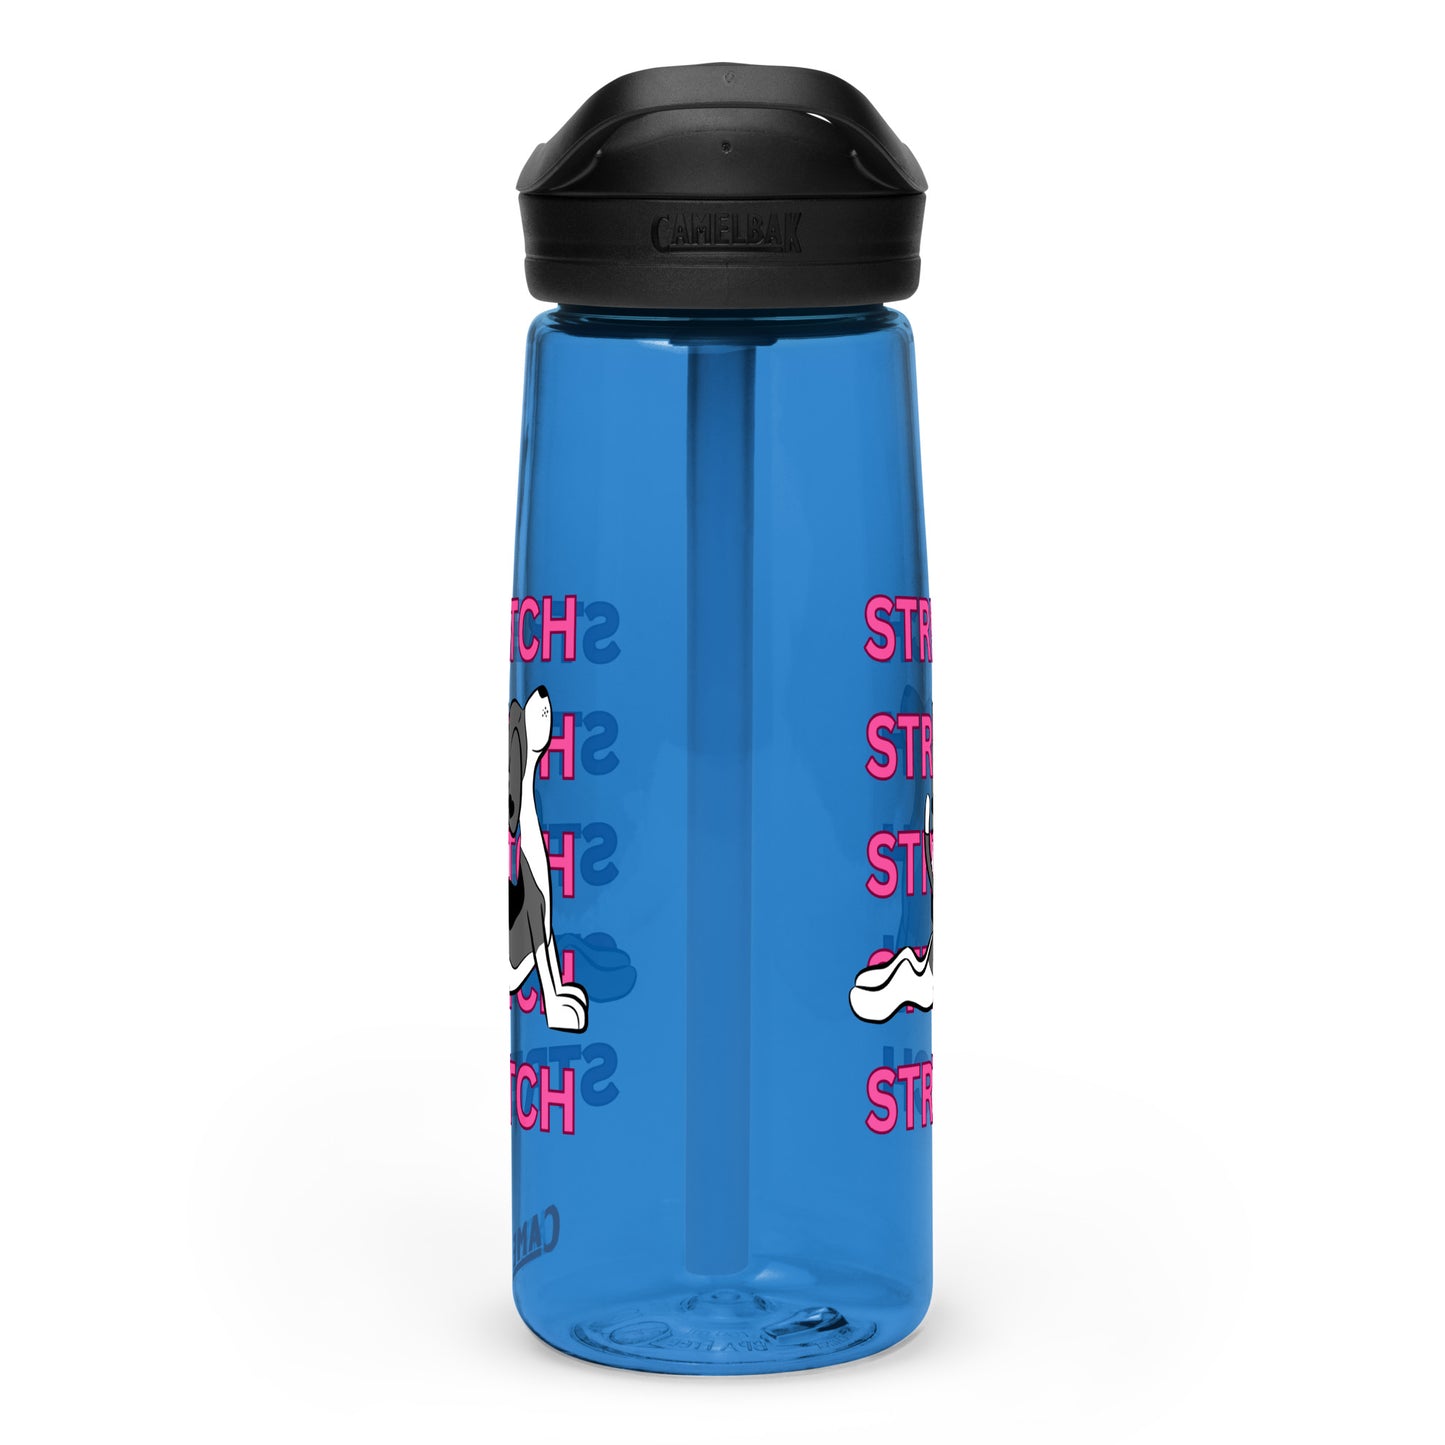 Stretch Sports water bottle - Ghostly Tails